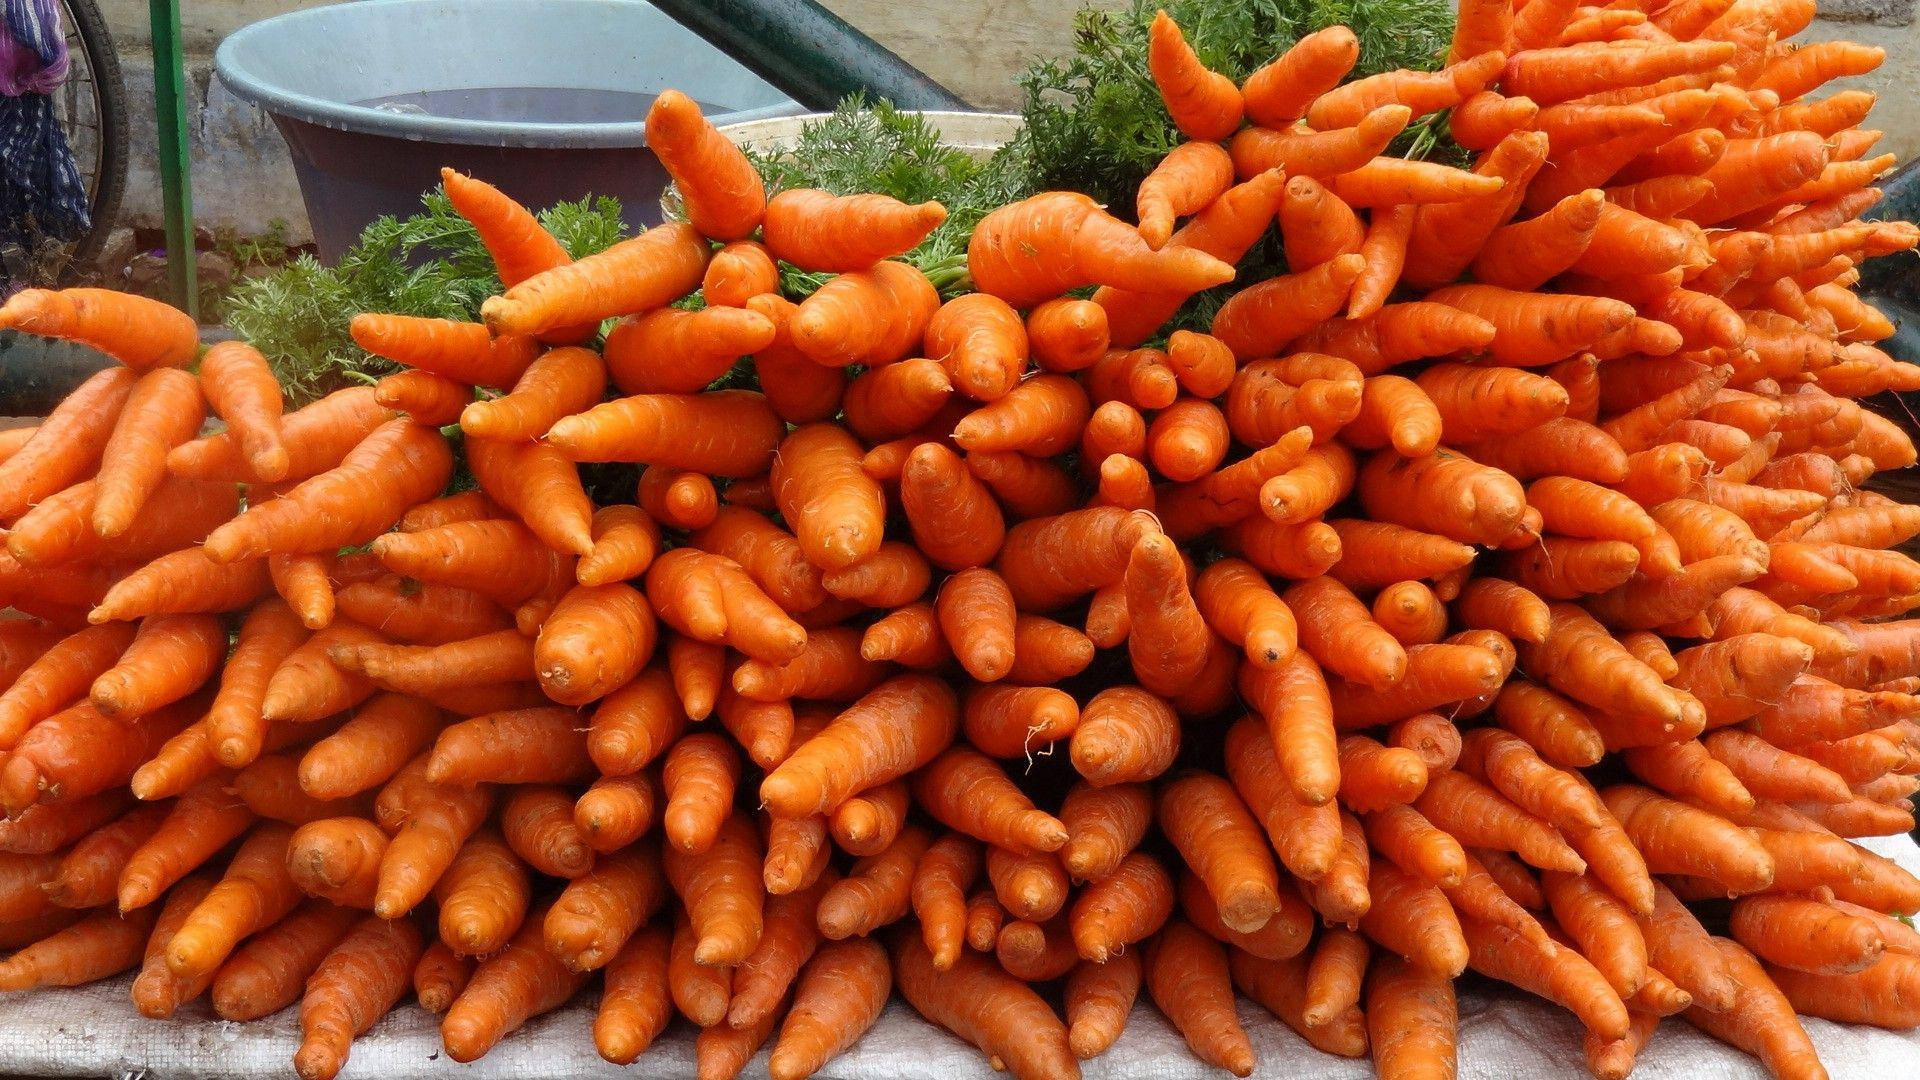 Orange Carrot Vegetables And Tap Roots Wallpaper